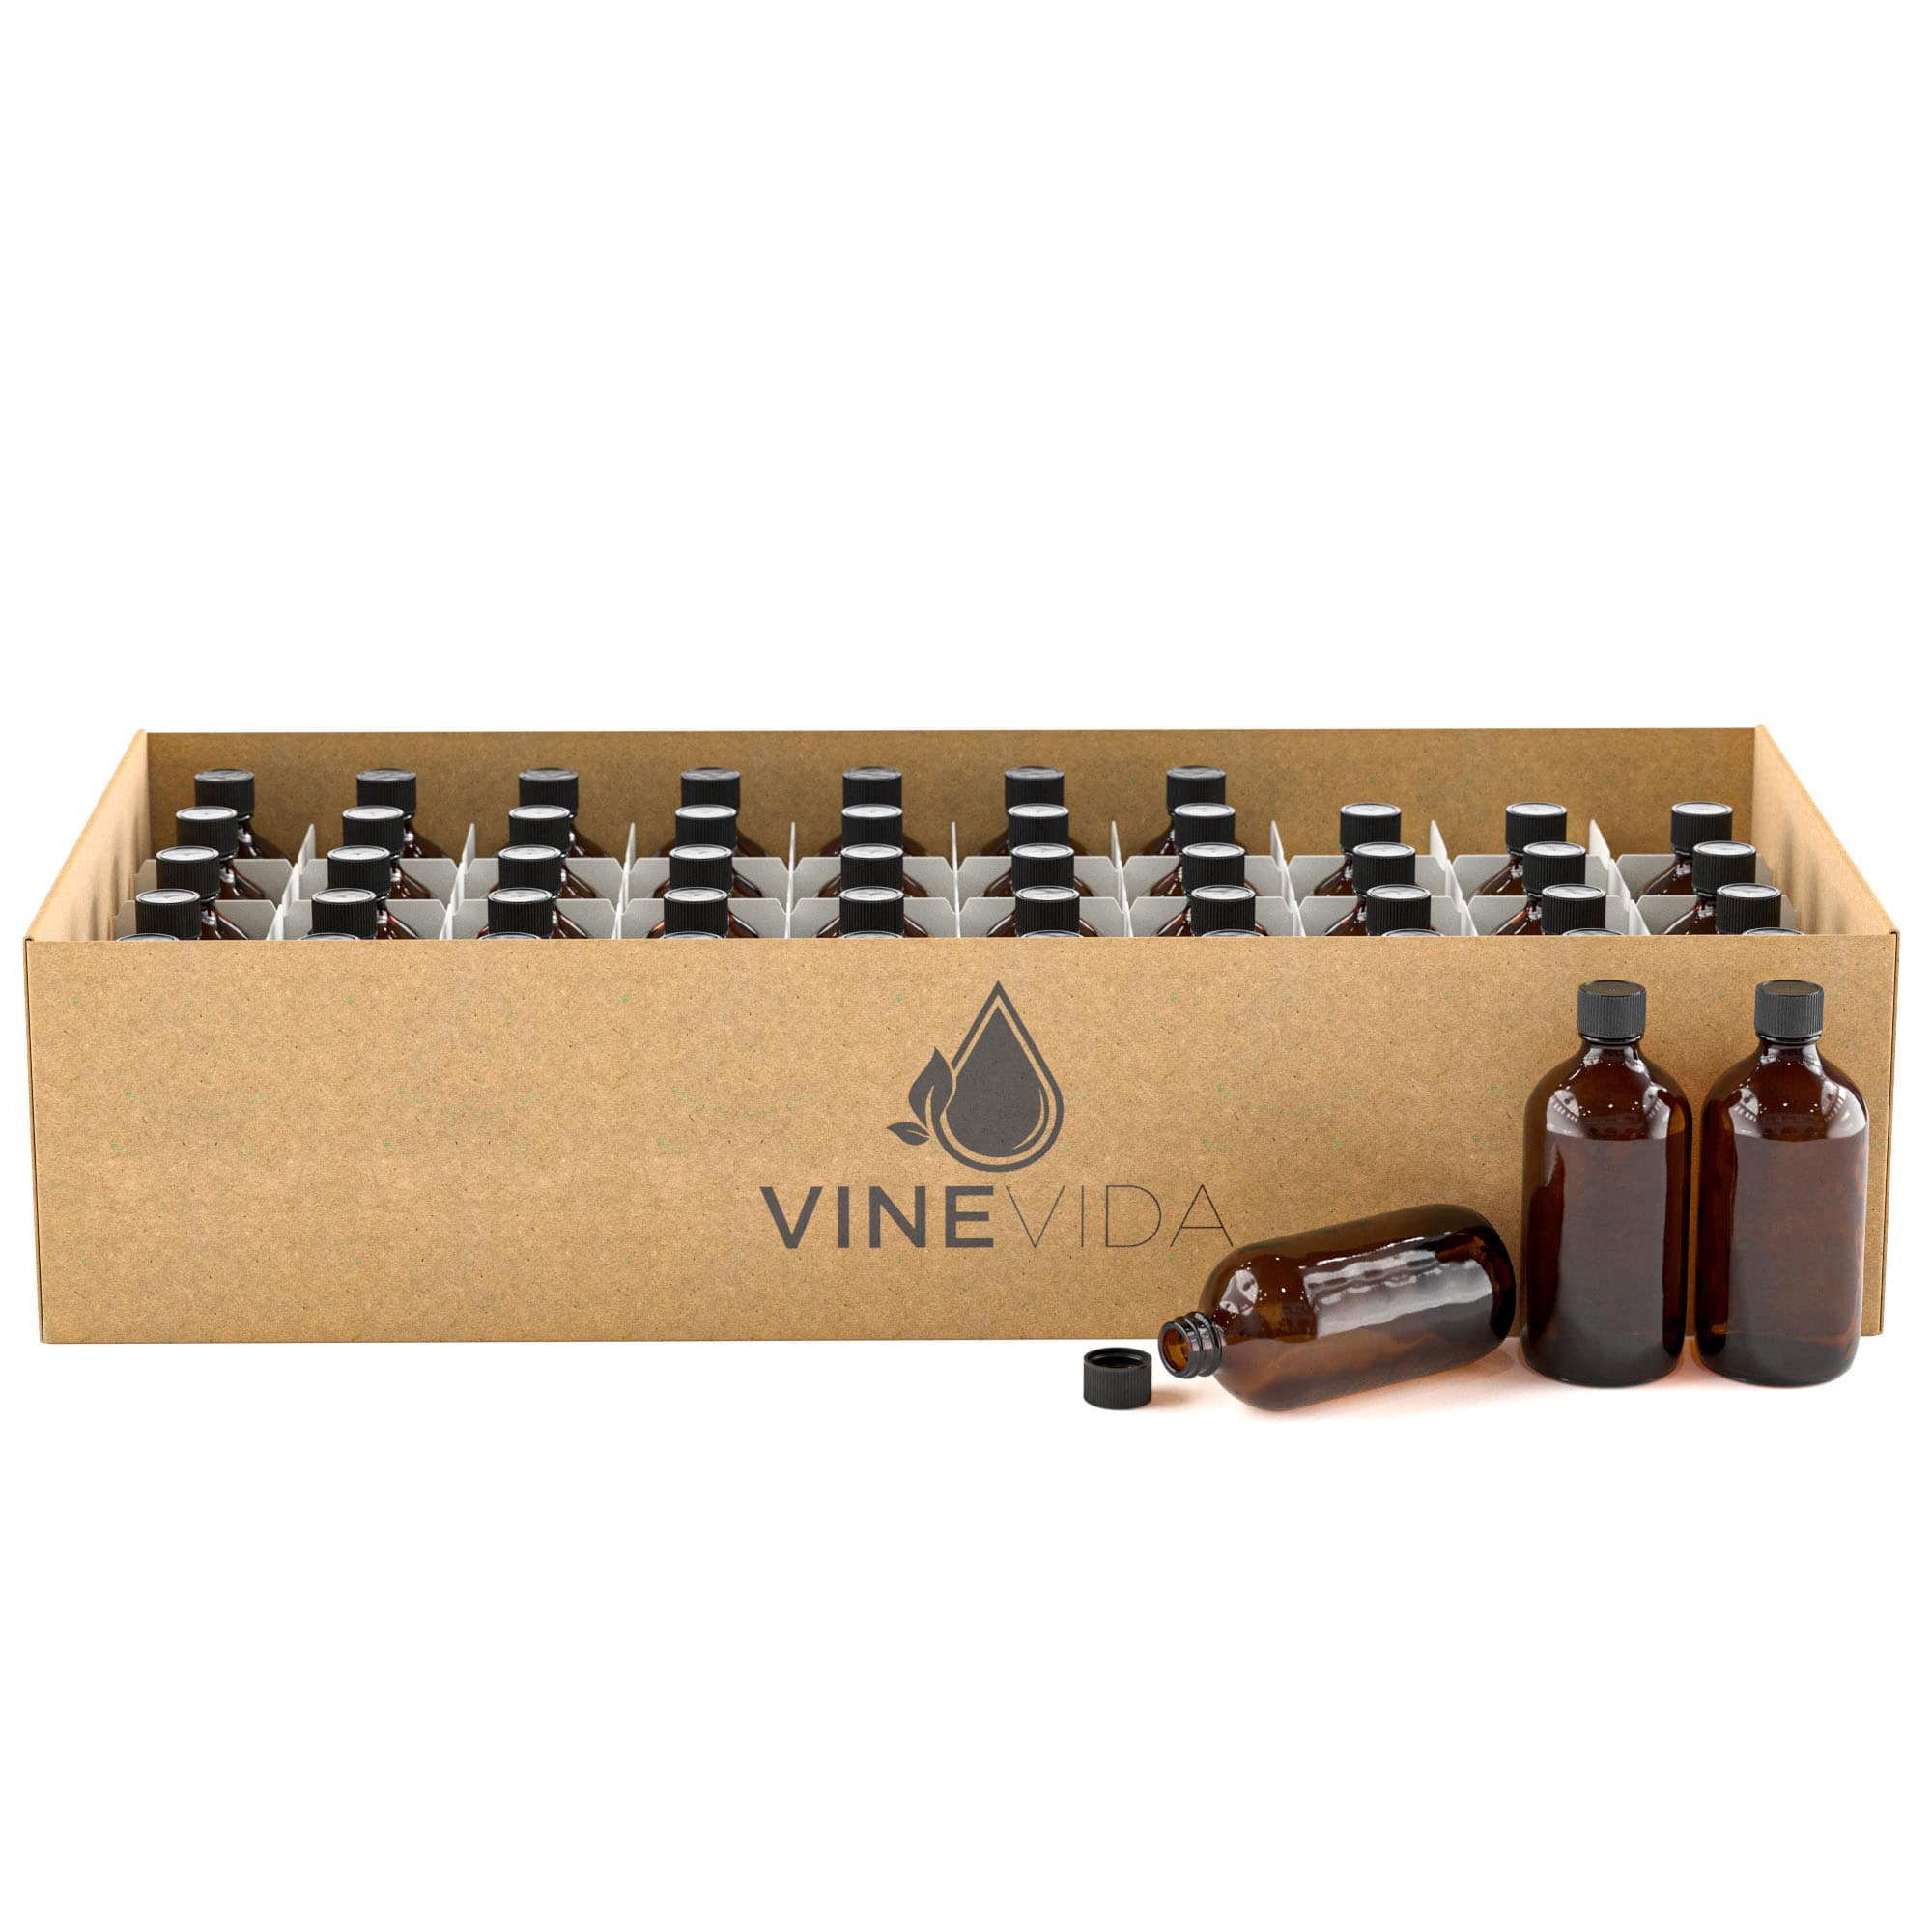 16 oz Amber Glass Bottle (caps NOT included) – Your Oil Tools